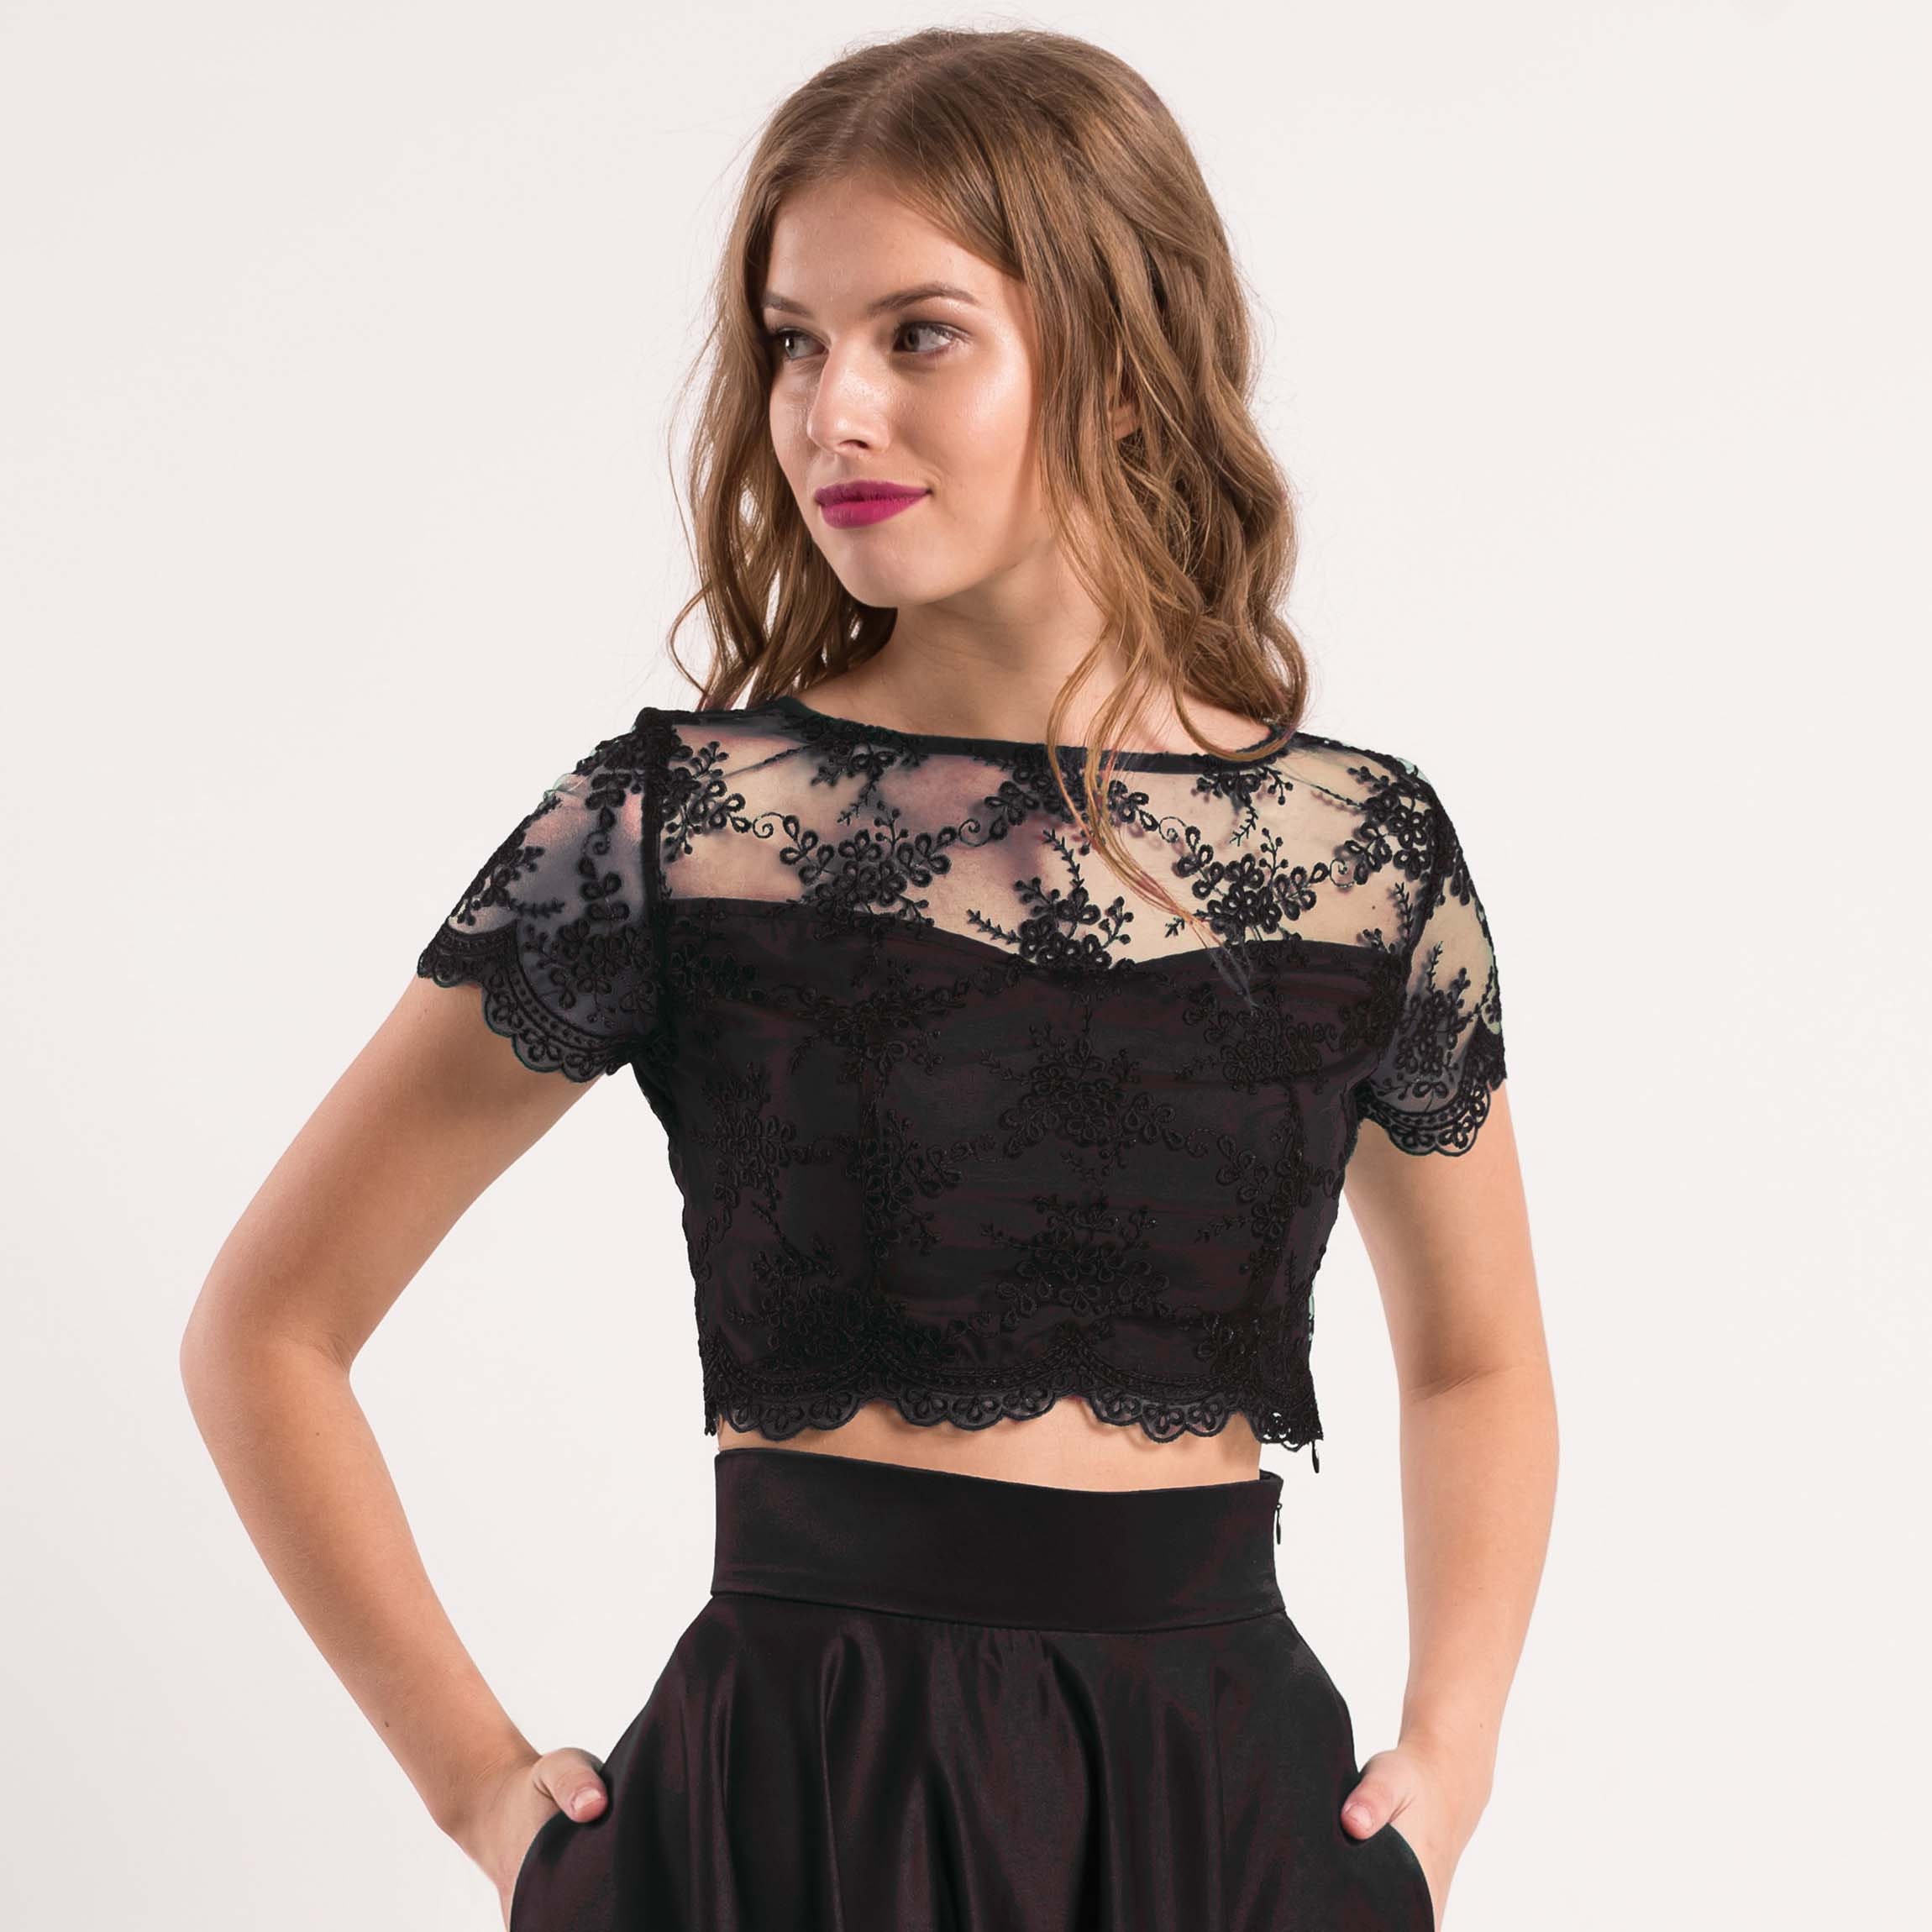 Evening Black Crop Top / Lace Top With Buttons / Crop Top Prom Dress /  Floral Lace Top With Short Sleeves / Evening Gown -  Canada